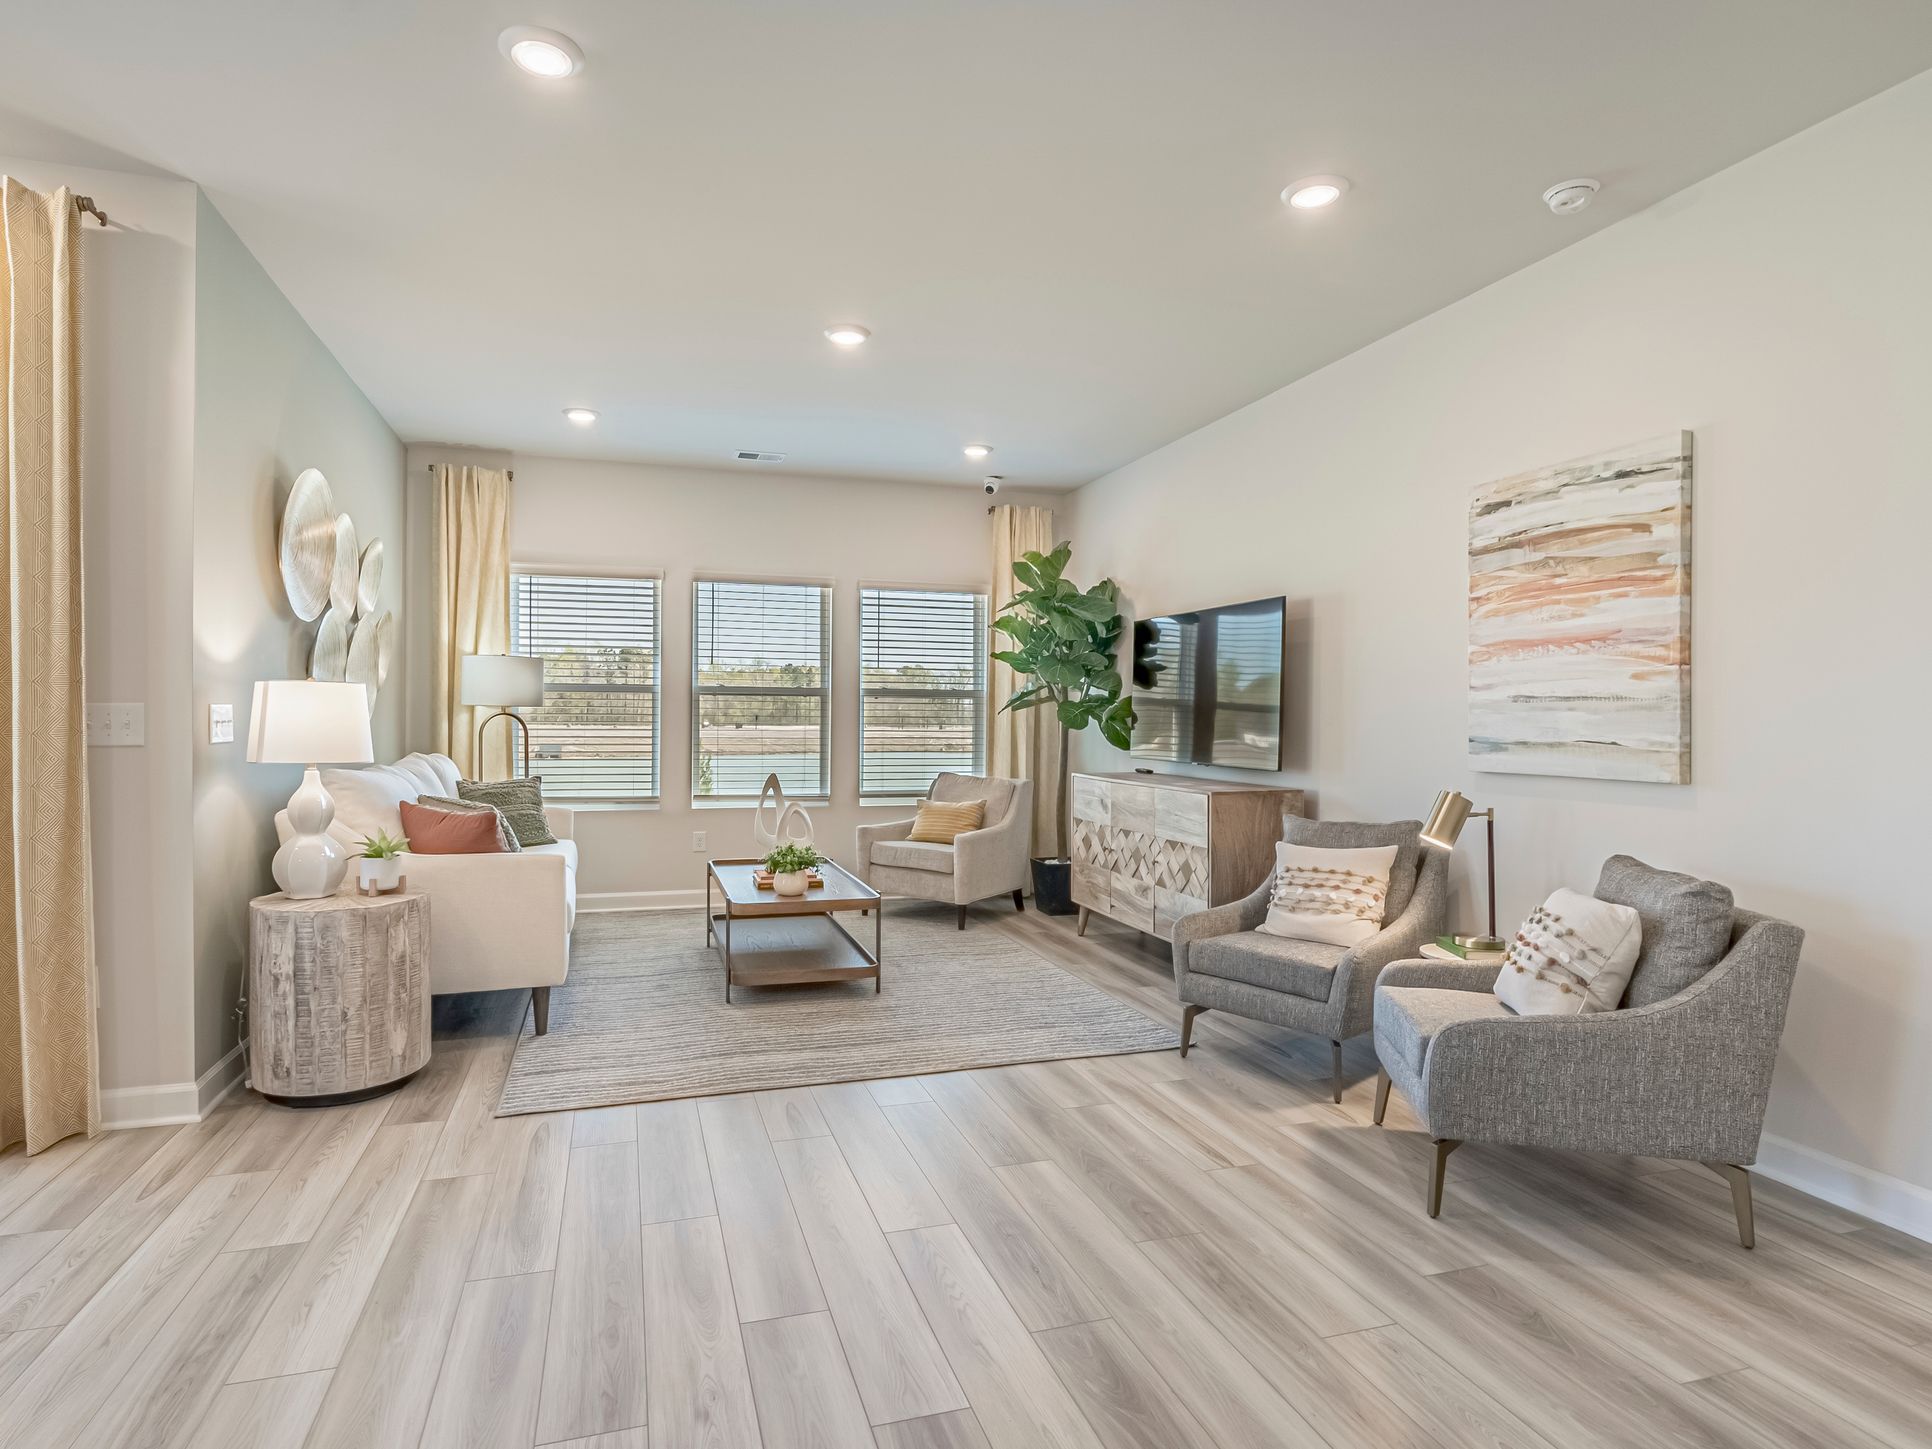 Enjoy plenty of natural light in the spacious family room.